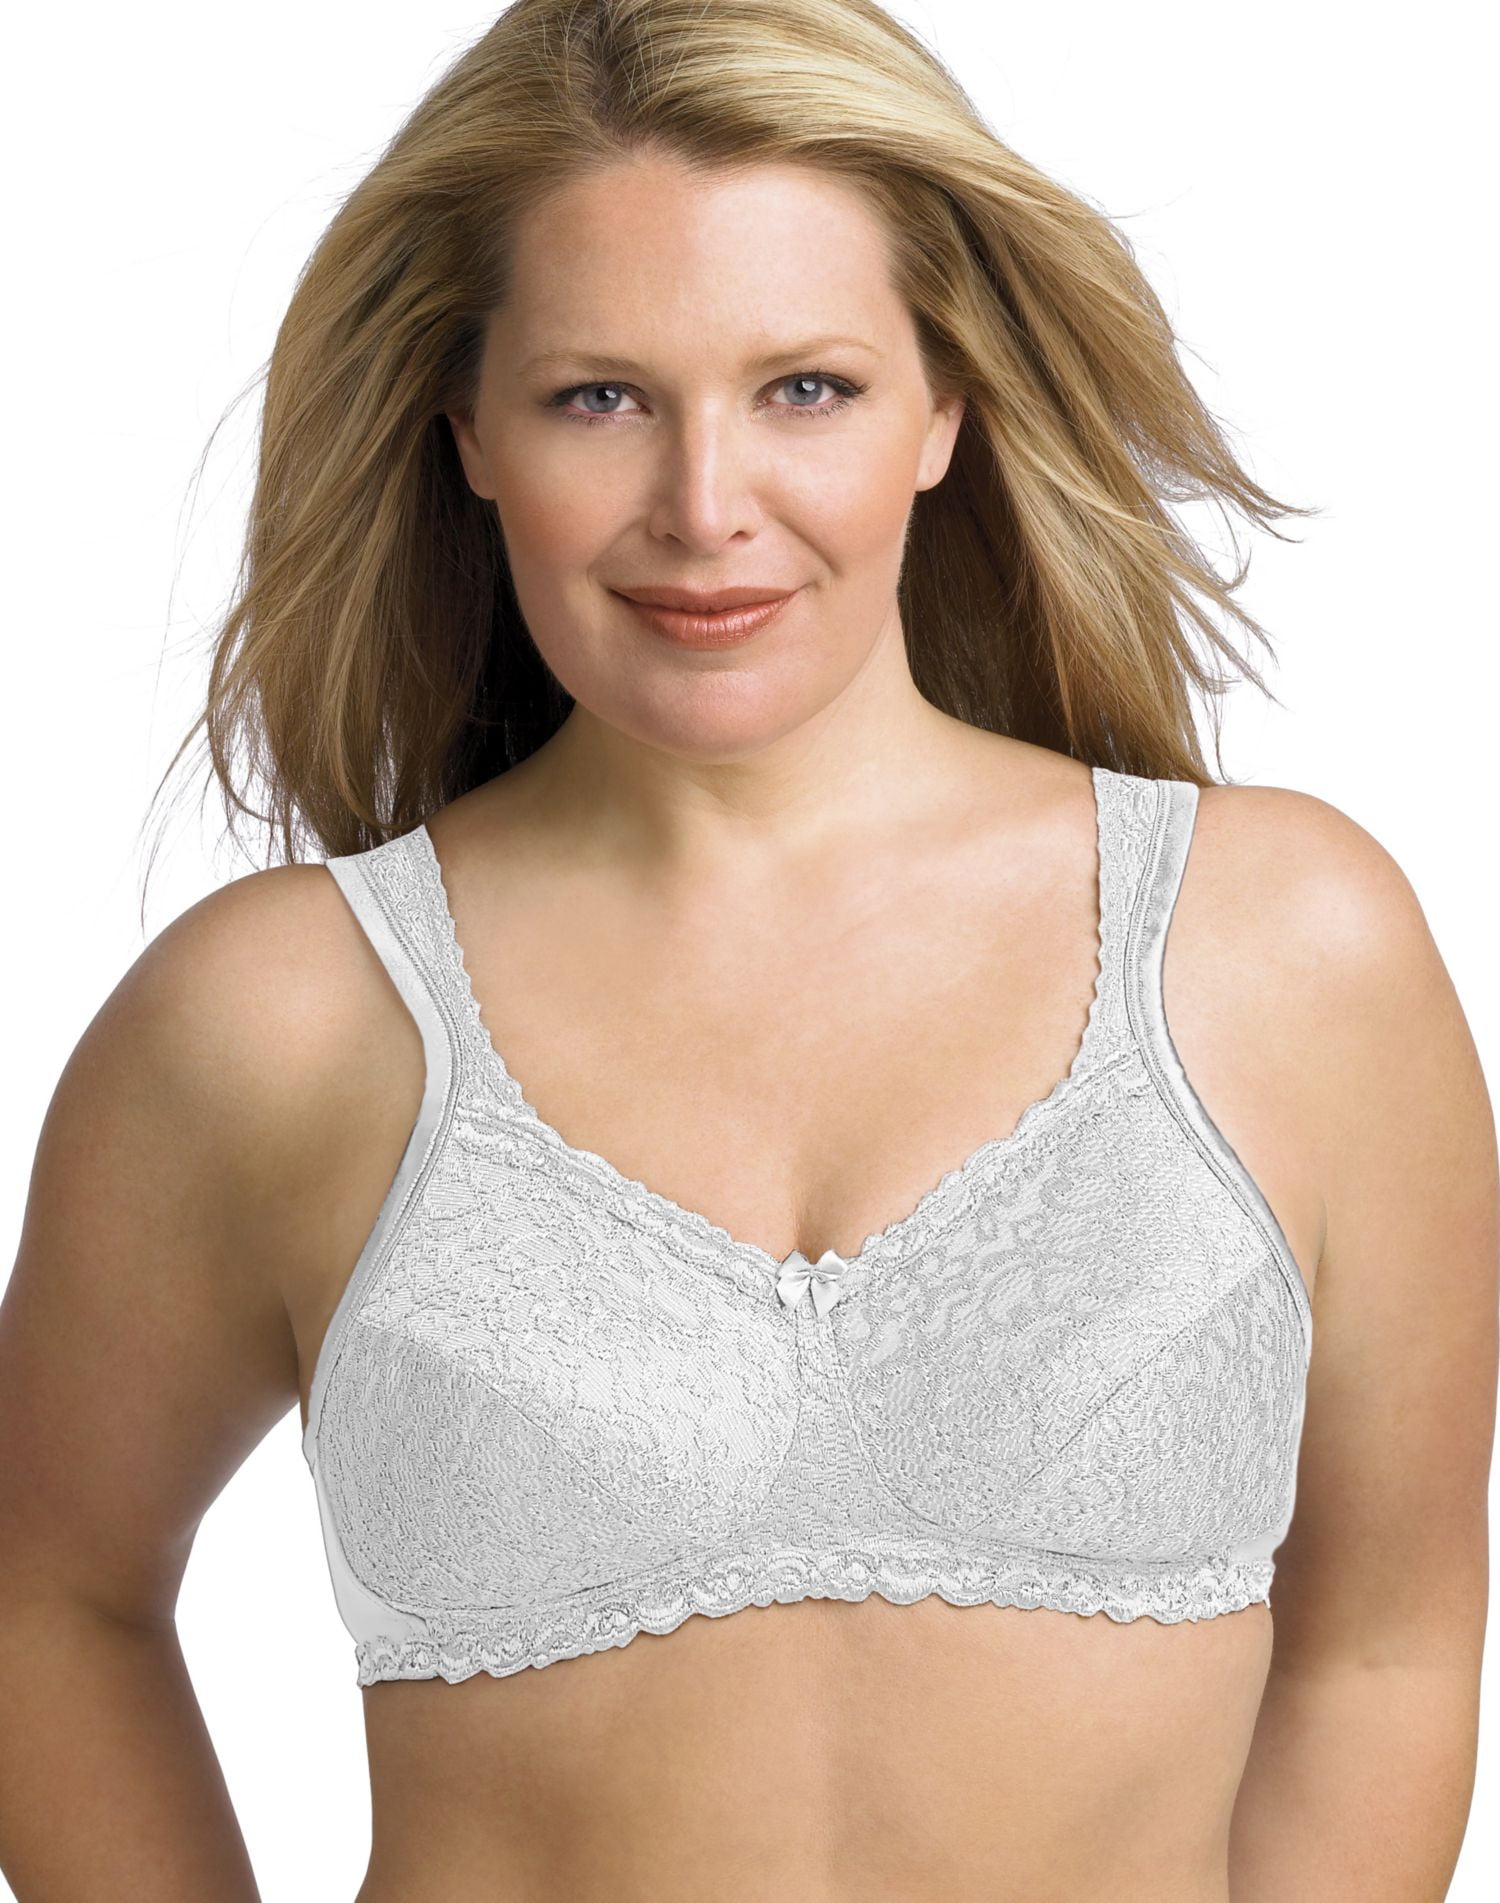 Playtex Womens 18 Hour Breathable Comfort Lace Wire-Free Bra Style